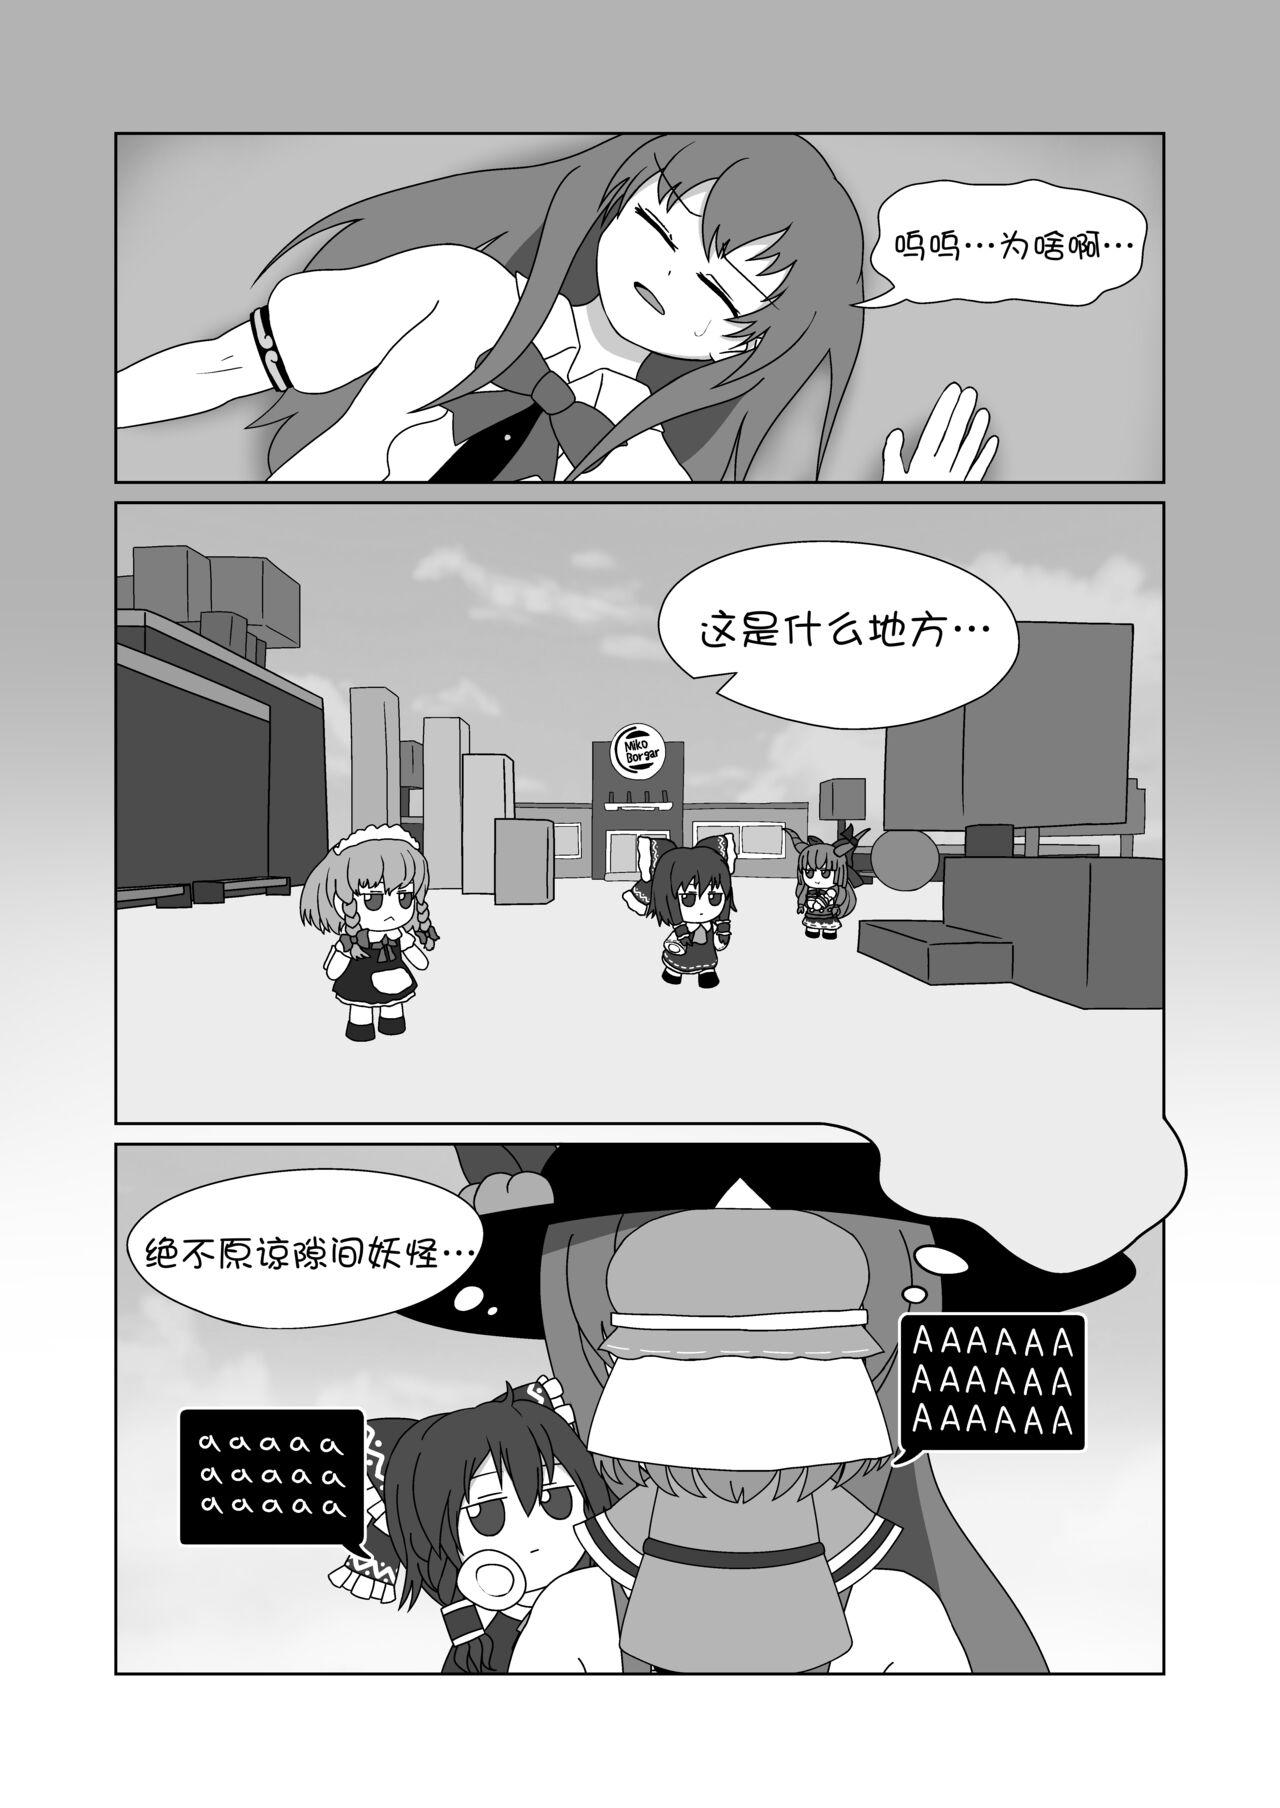 Bare 天子 in BecomeFumo - Touhou project Massage Sex - Page 5